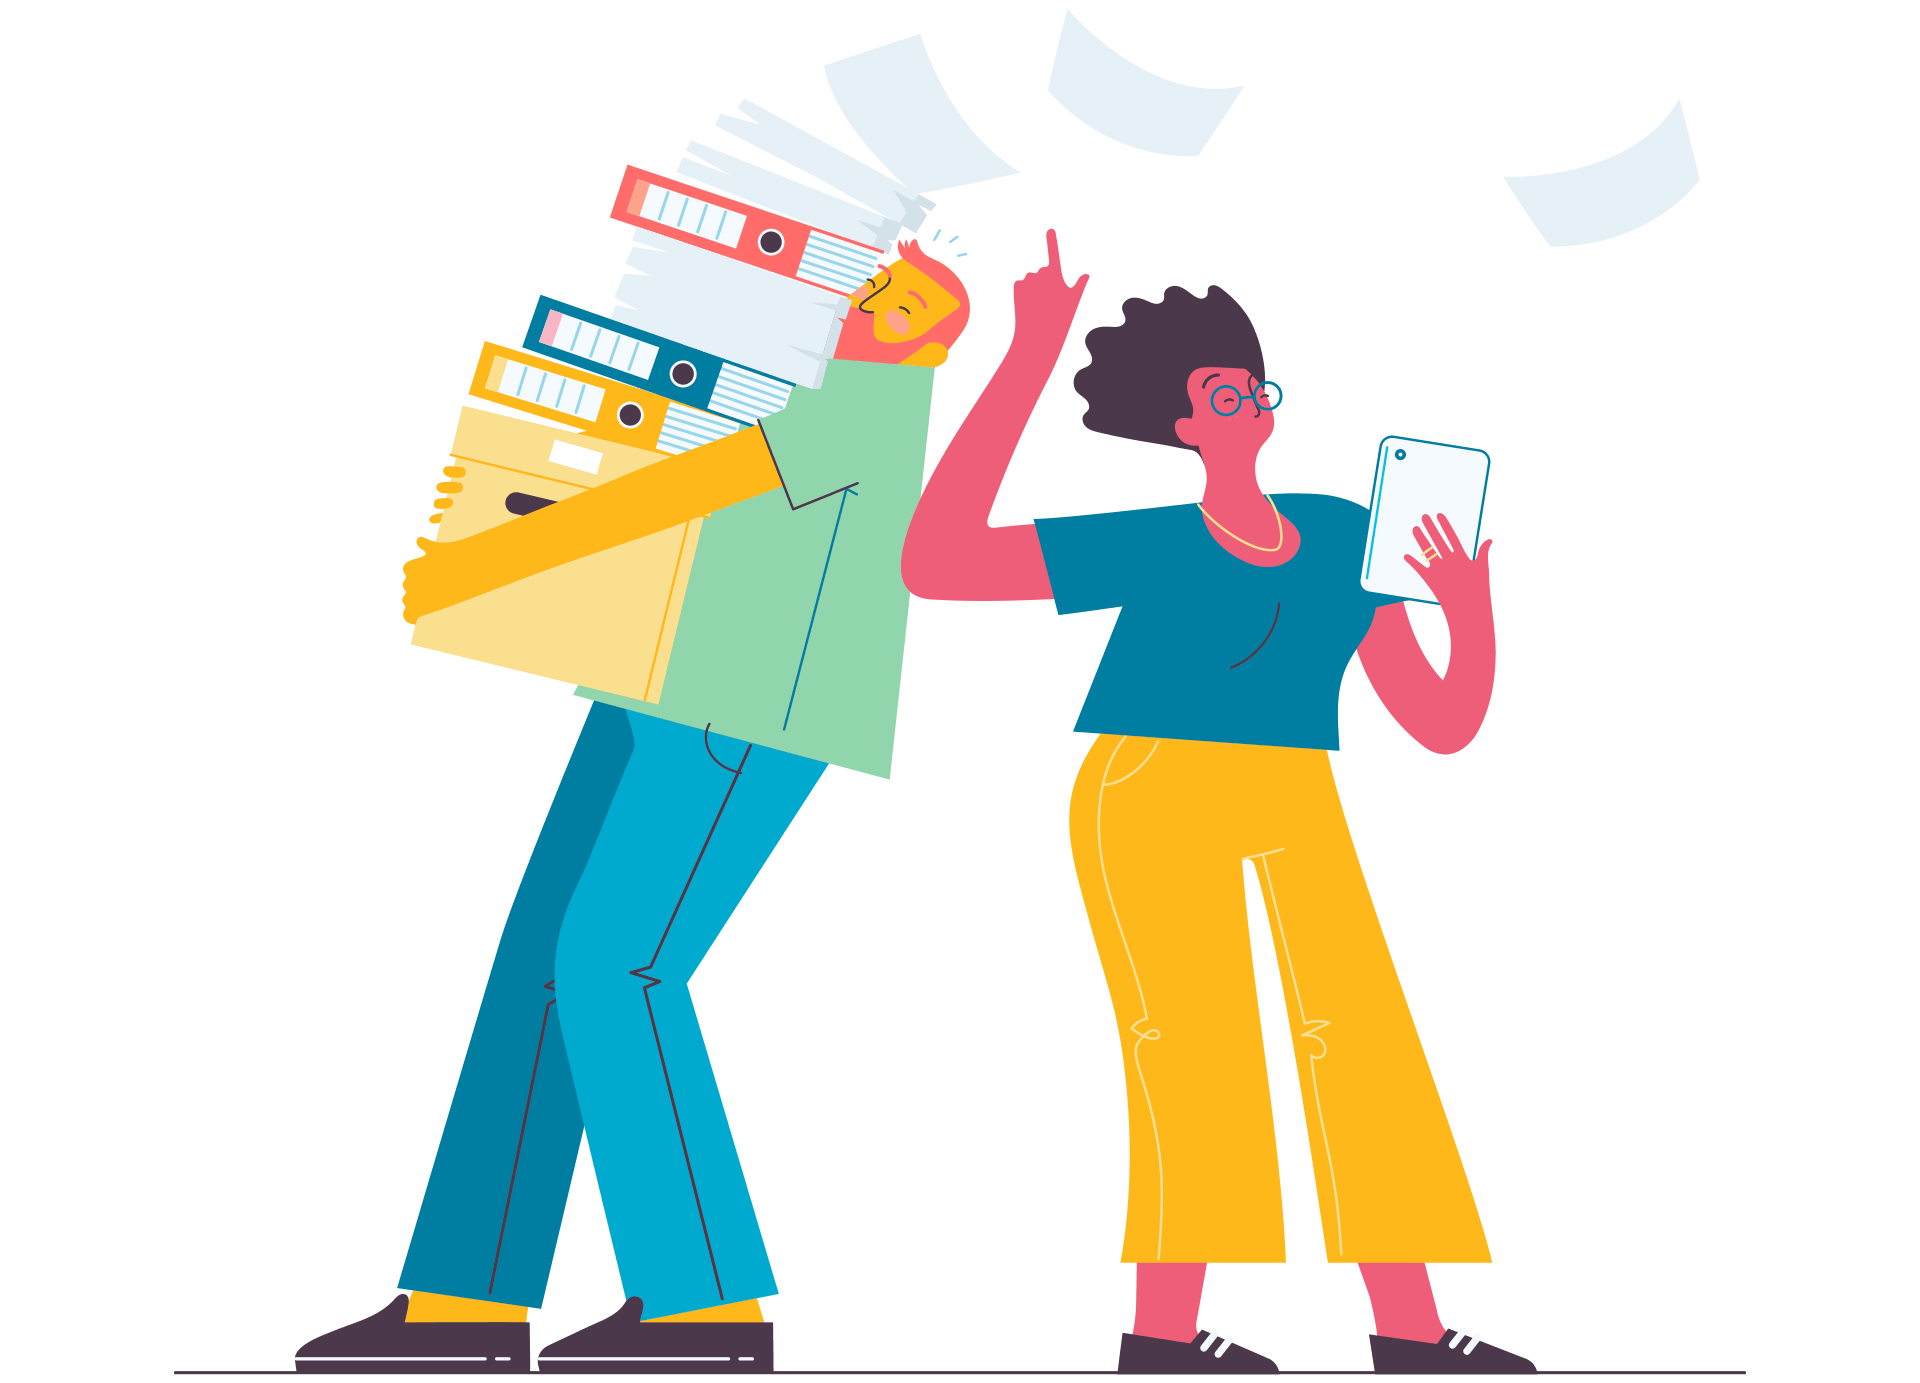 An illustration of a man carrying a stack of paper and folders and a woman with a tablet